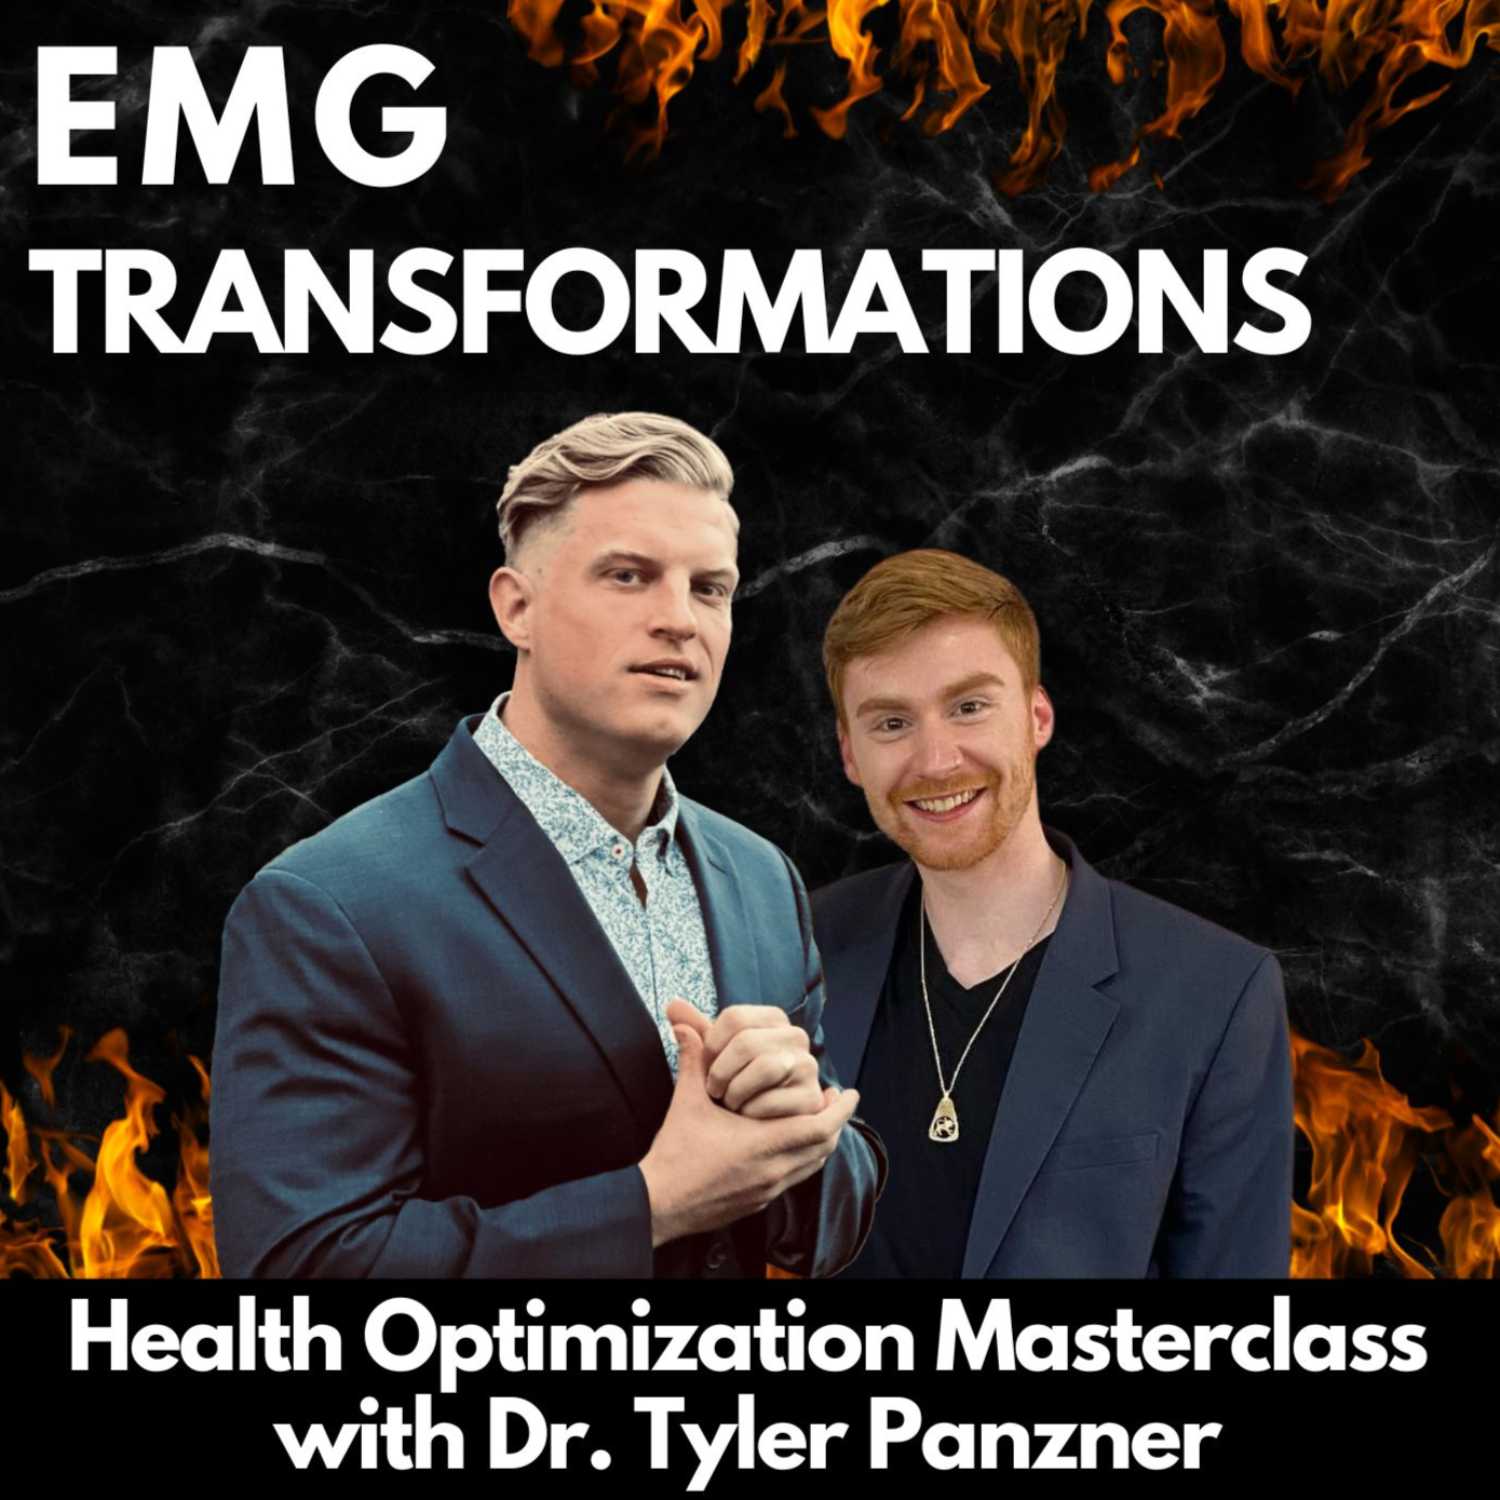 Health Optimization Masterclass with Dr. Tyler Panzner